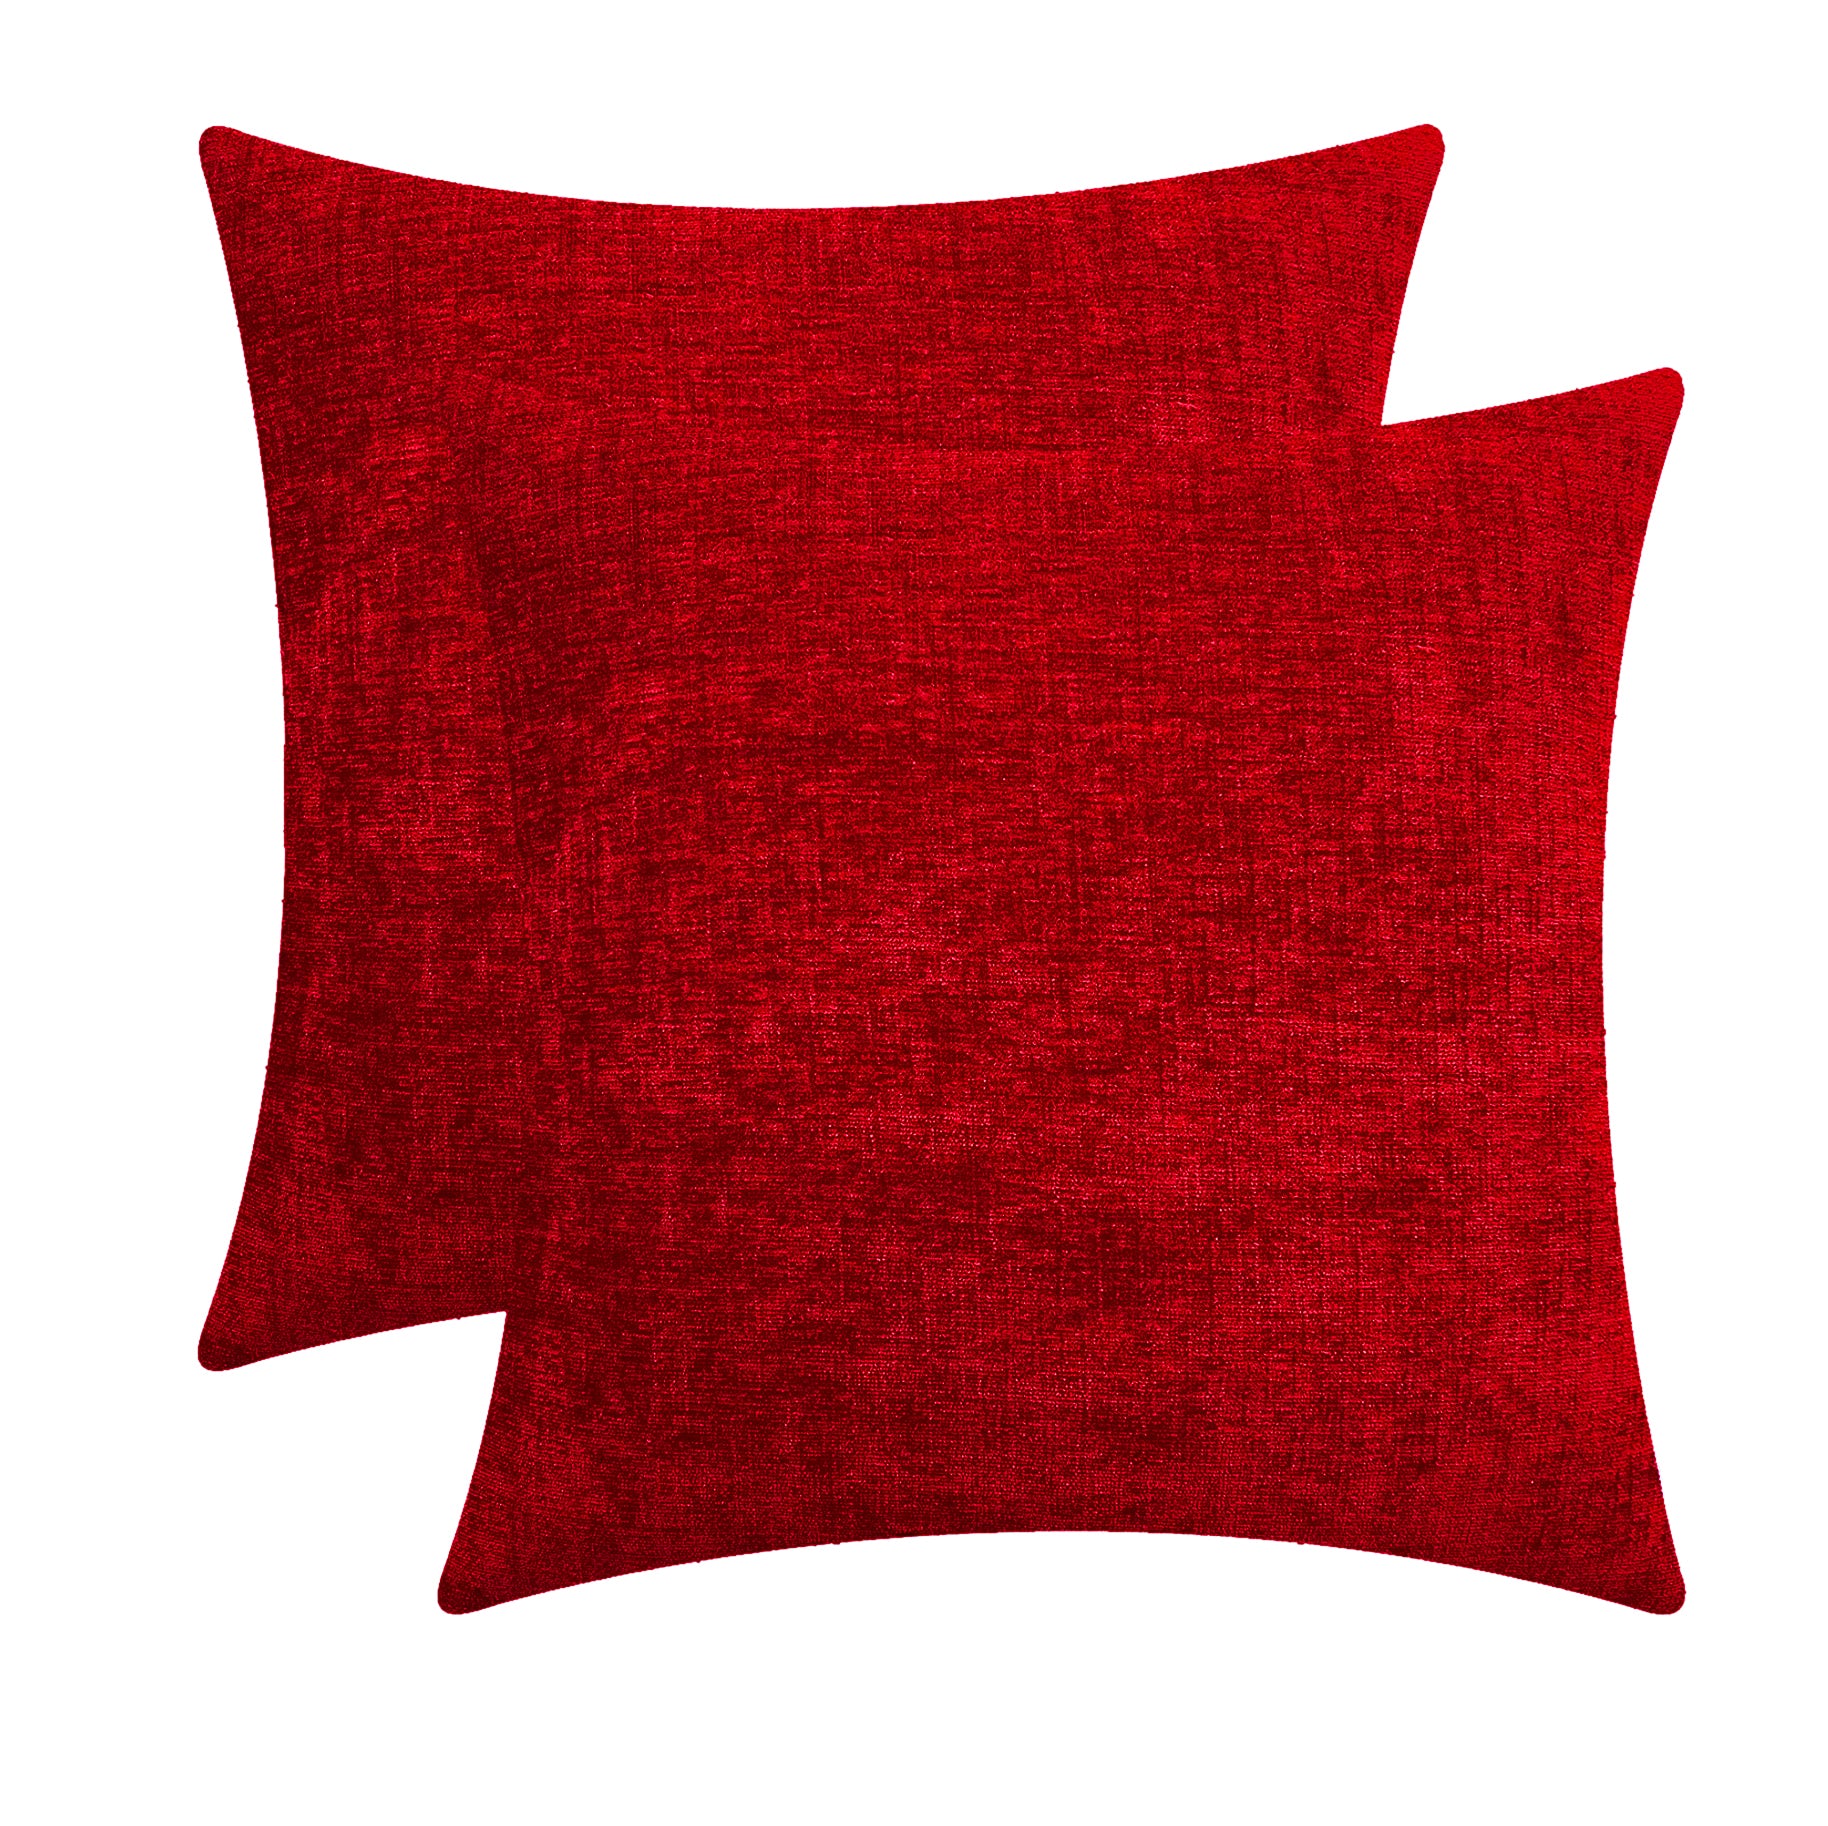 Couch sofa covers, Chenille, couch cushion covers , 16x16 Inch/40x40 Cms, decorative pillow covers, Knife Edge with Invisible Zipper, sectional couch covers, Pack of 2, Red by Lushomes